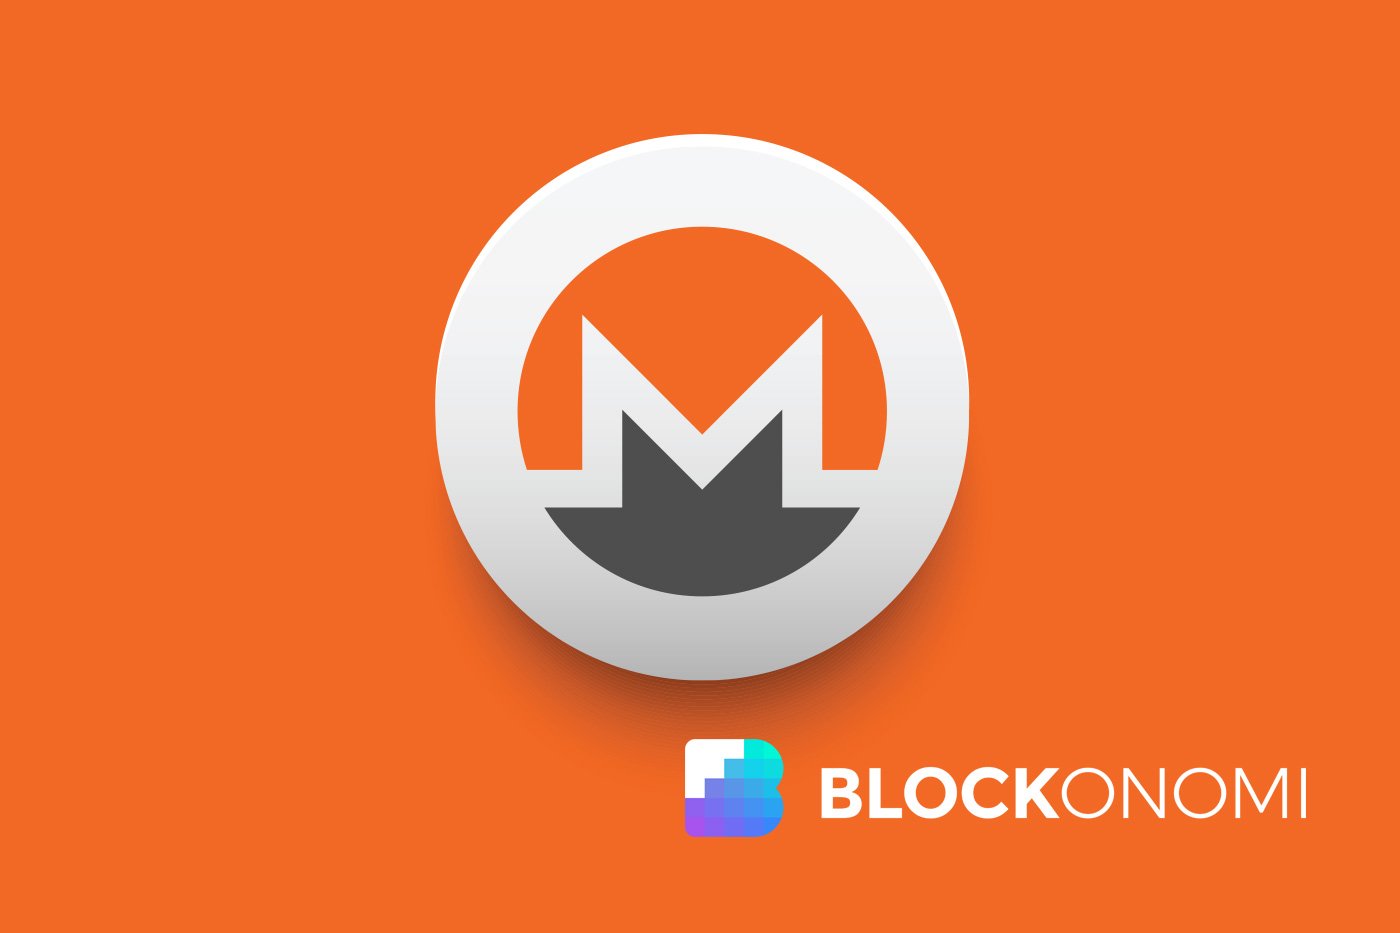 Monero (XMR) delisted from Binance: Is the anonymous cryptocurrency in danger?